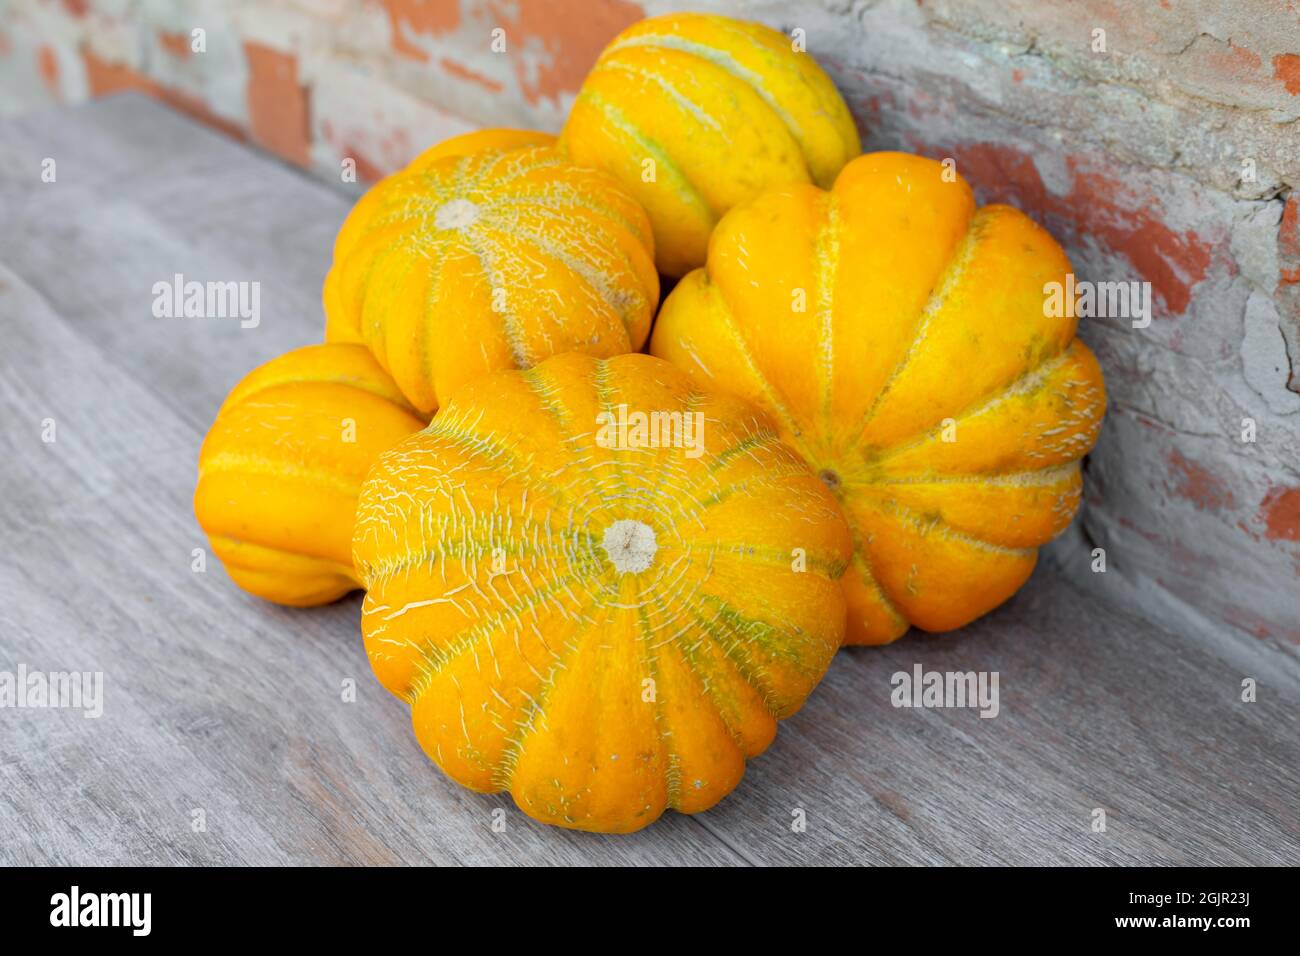 Small homemade yellow melons of the Ethiopka variety. Harvesting melons. Stock Photo